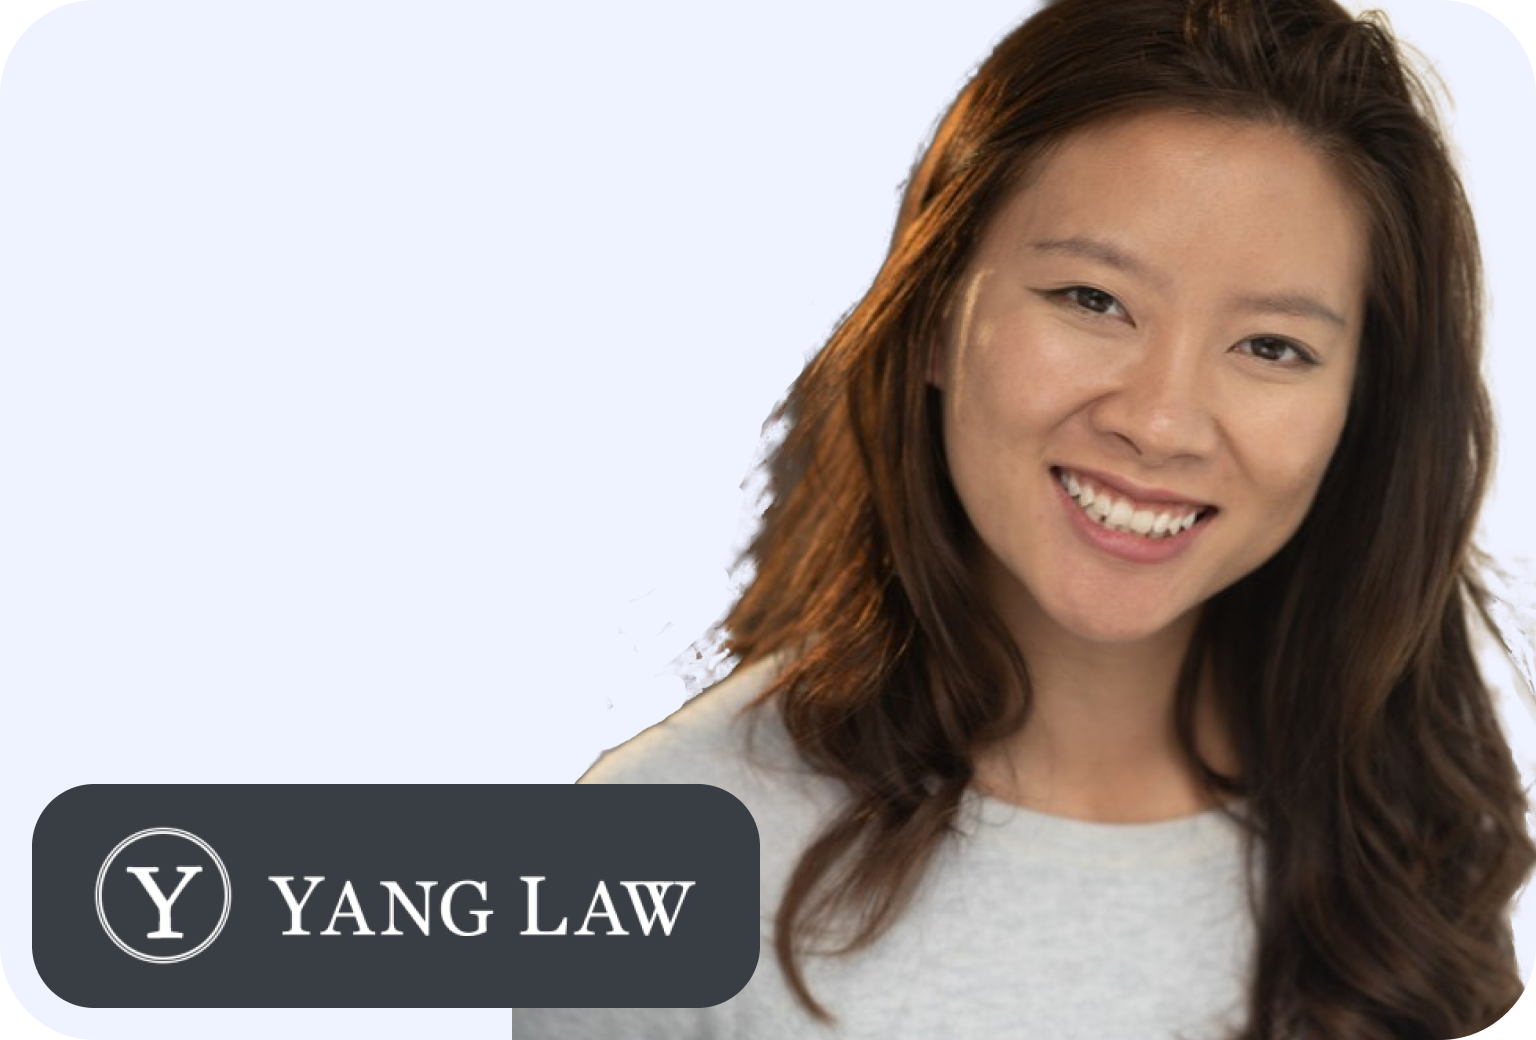 Yang Law: A Success Story in Accounts Receivable Management with Kolleno